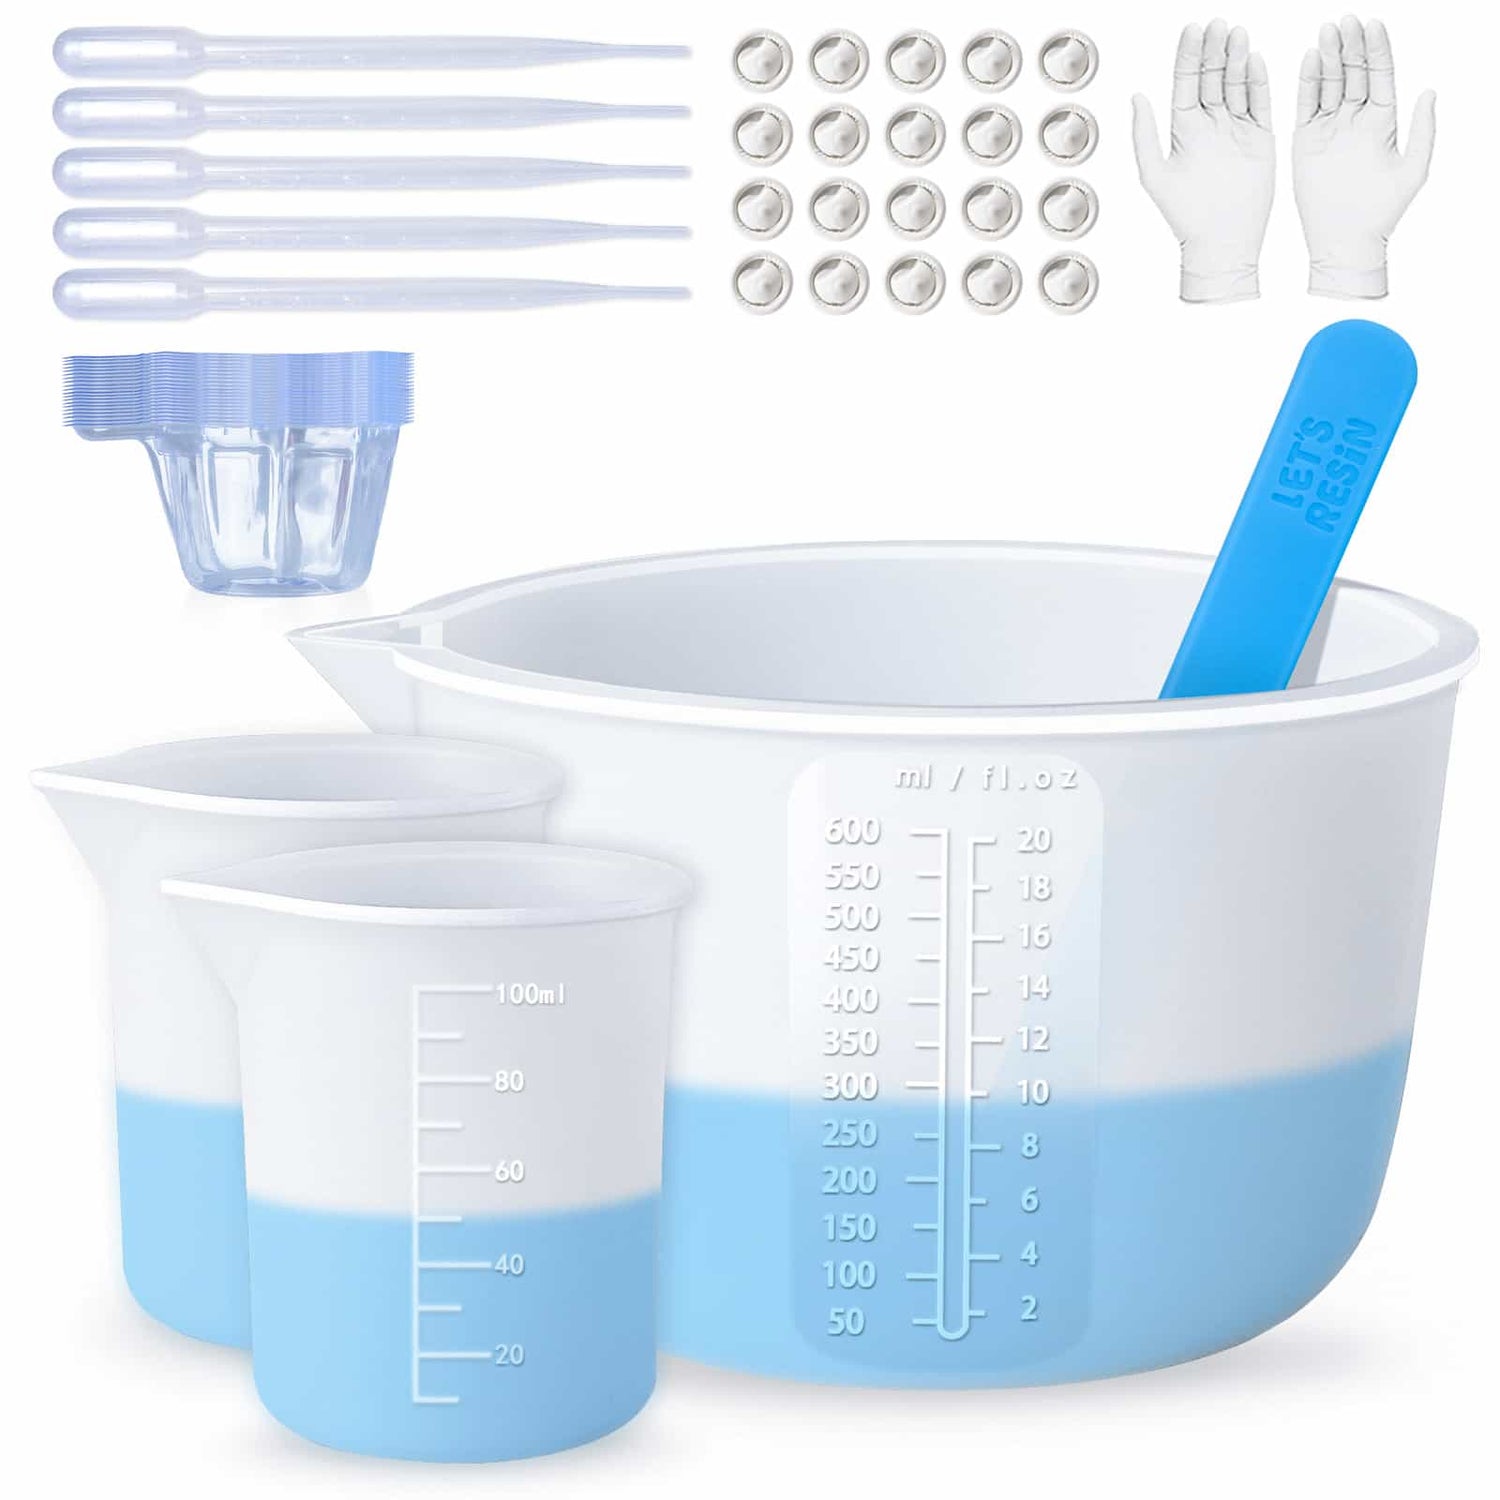 2x Silicone Measuring Cups for Resin, DIY Glue Cups Making Handmade Craft , Silicone  Mixing Cups for Resin Epoxy, Mixing 